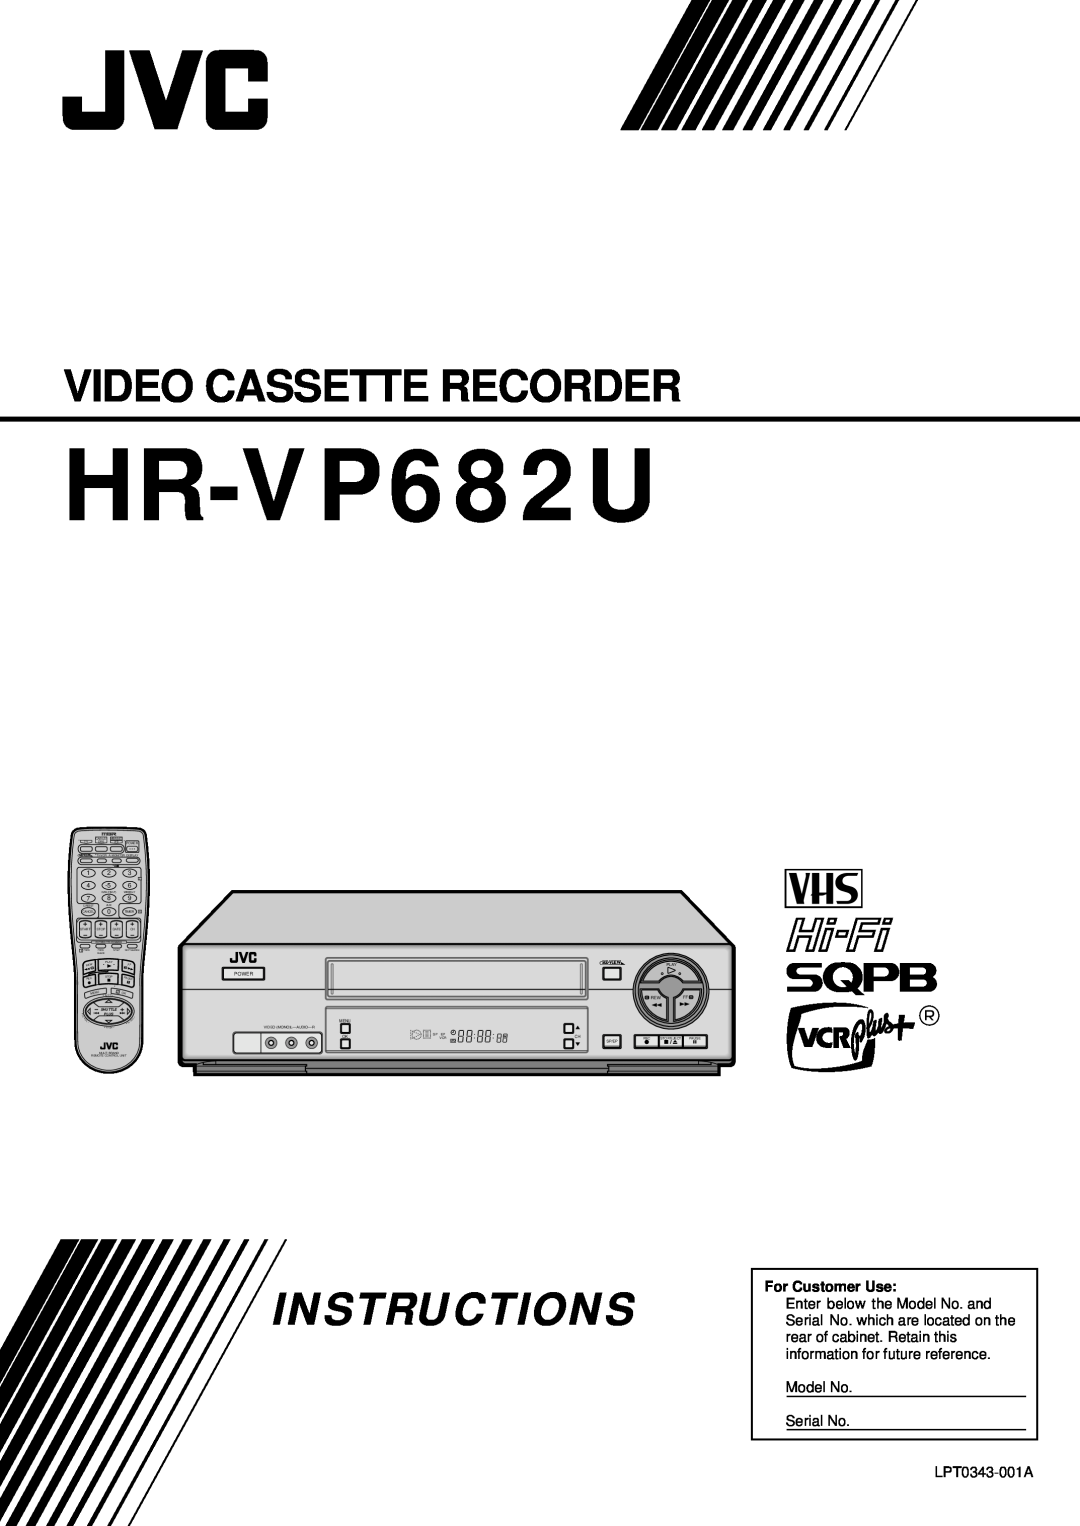 JVC HR-VP682U manual Video Cassette Recorder, Instructions, For Customer Use, Model No Serial No, LPT0343-001A, Play, Plus 